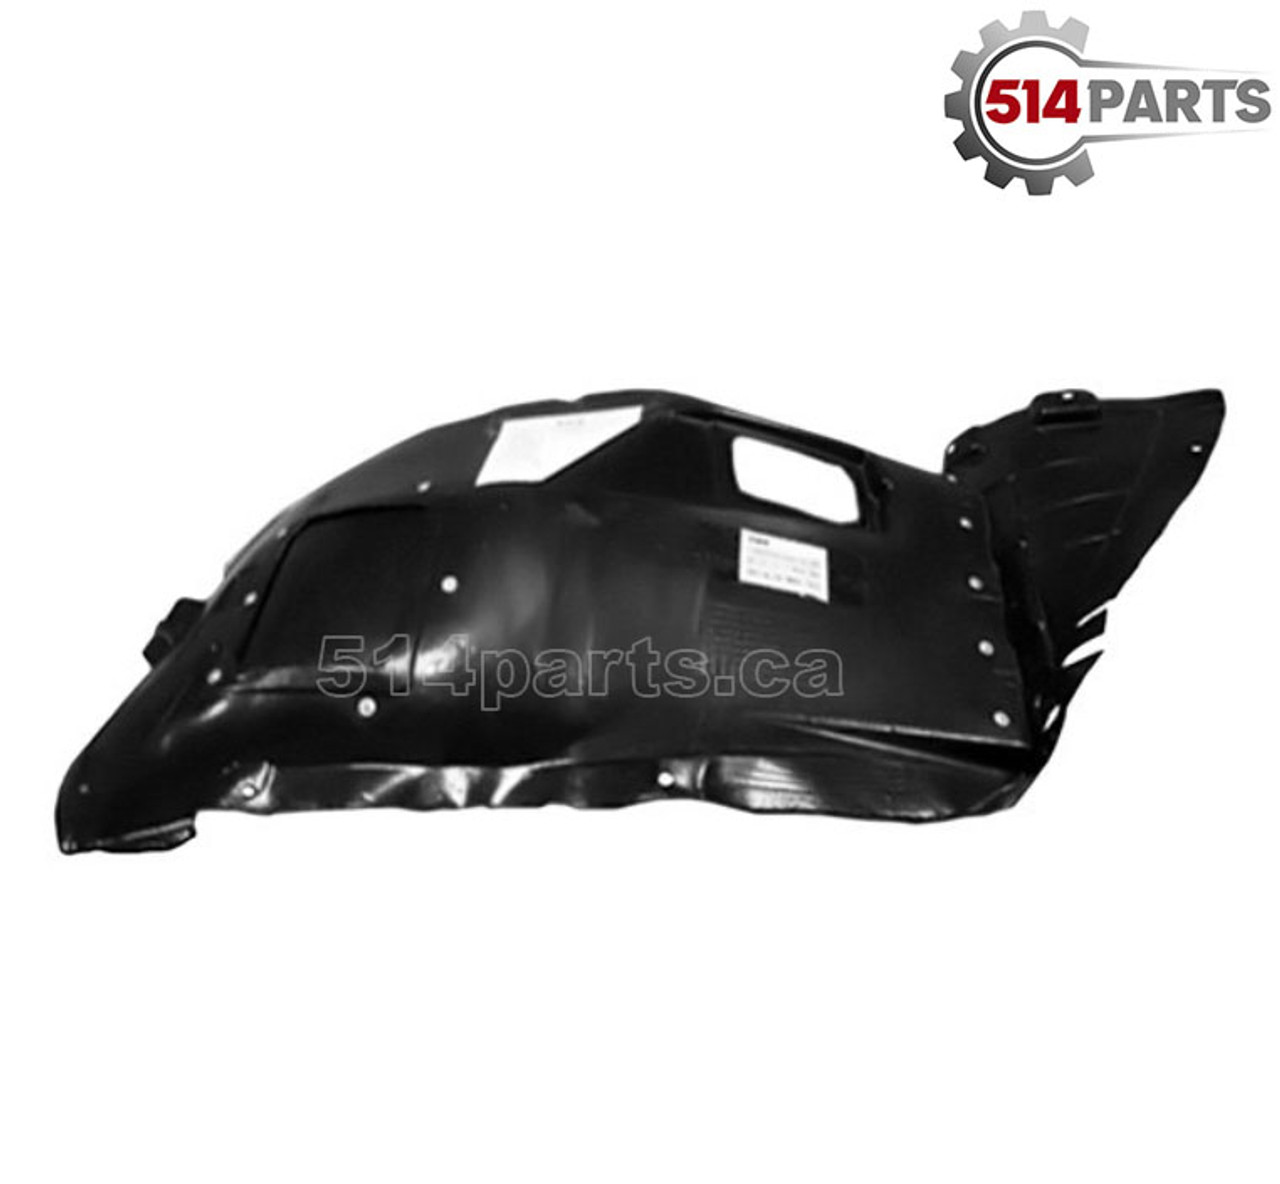 BMW 3 SERIES (2006 - 2011 SEDAN), (2006 - 2012 WAGON) without M SPORT FENDER LINER FRONT SECTION - FAUSSE AILE